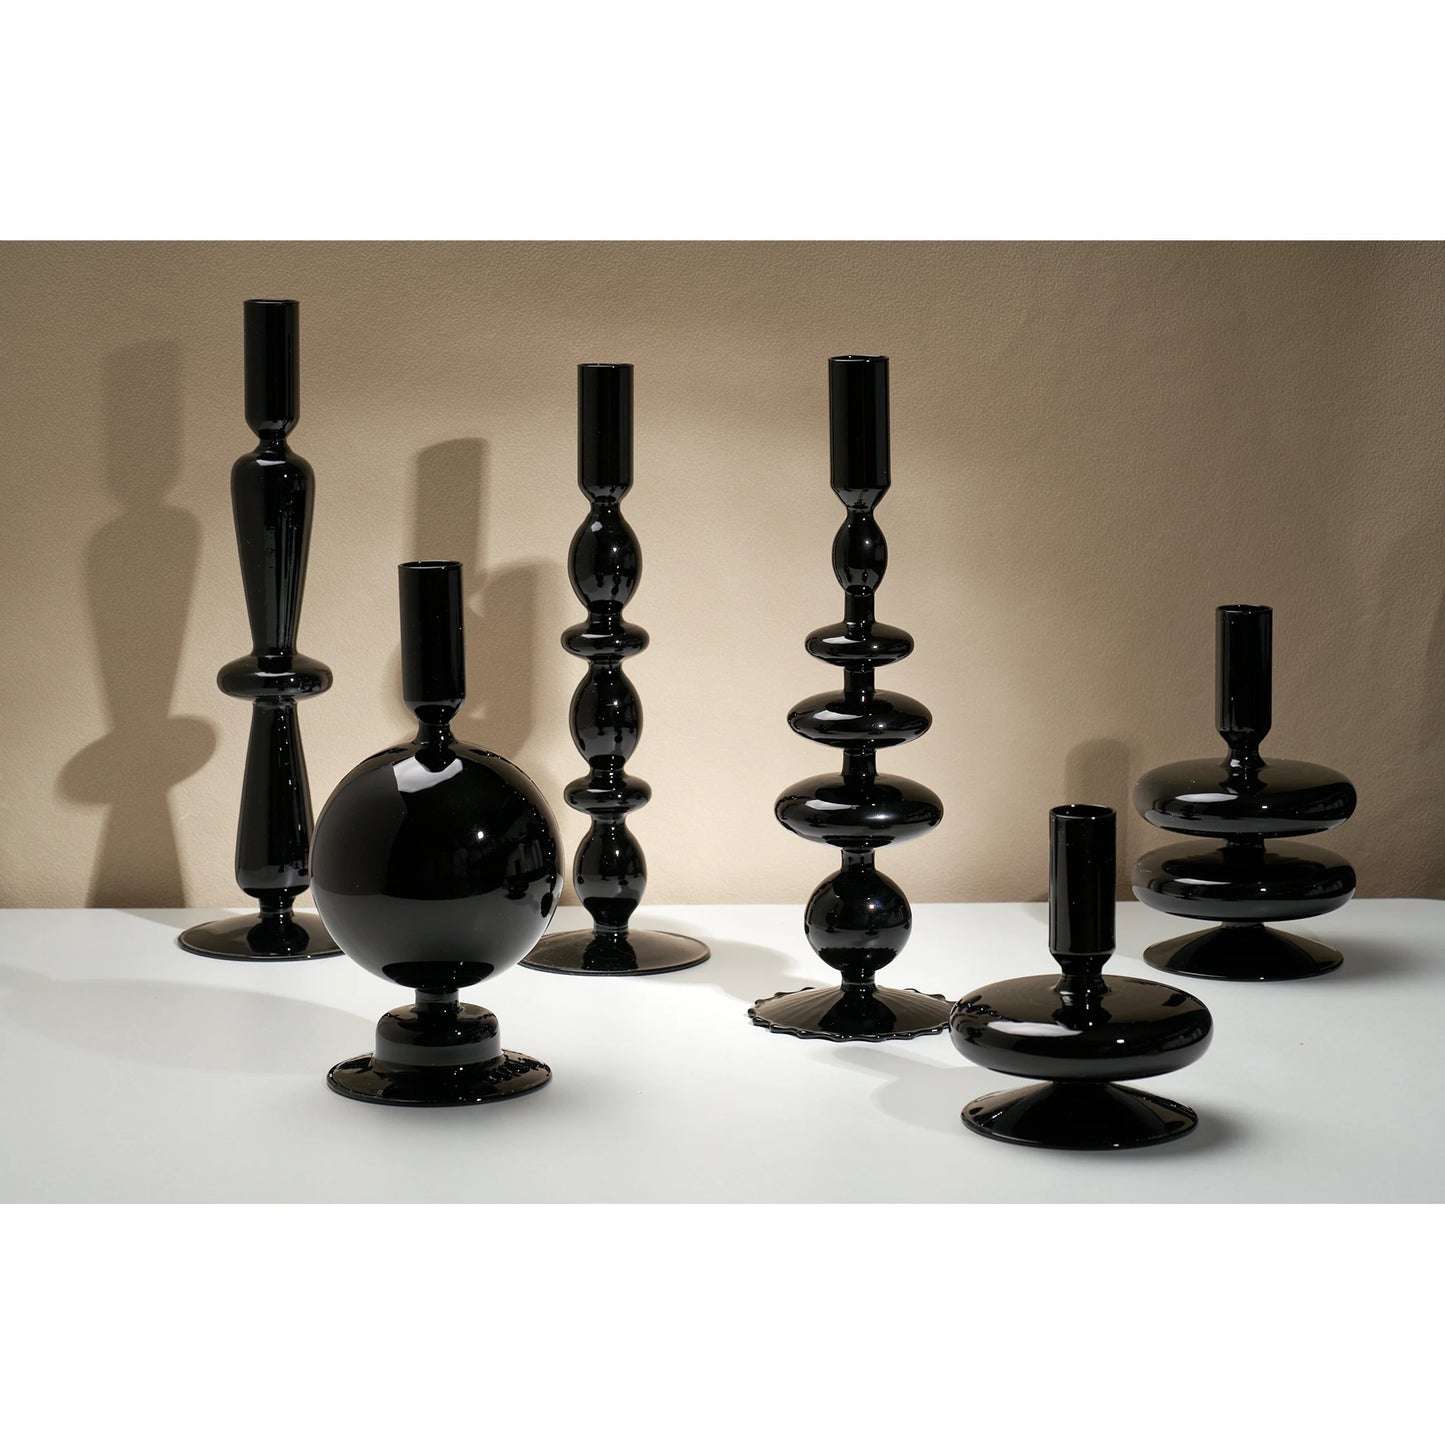 Black Modern Glass Candle Holders Choose From Our Exclusive Range To Find The Perfect Fit for Your Style.